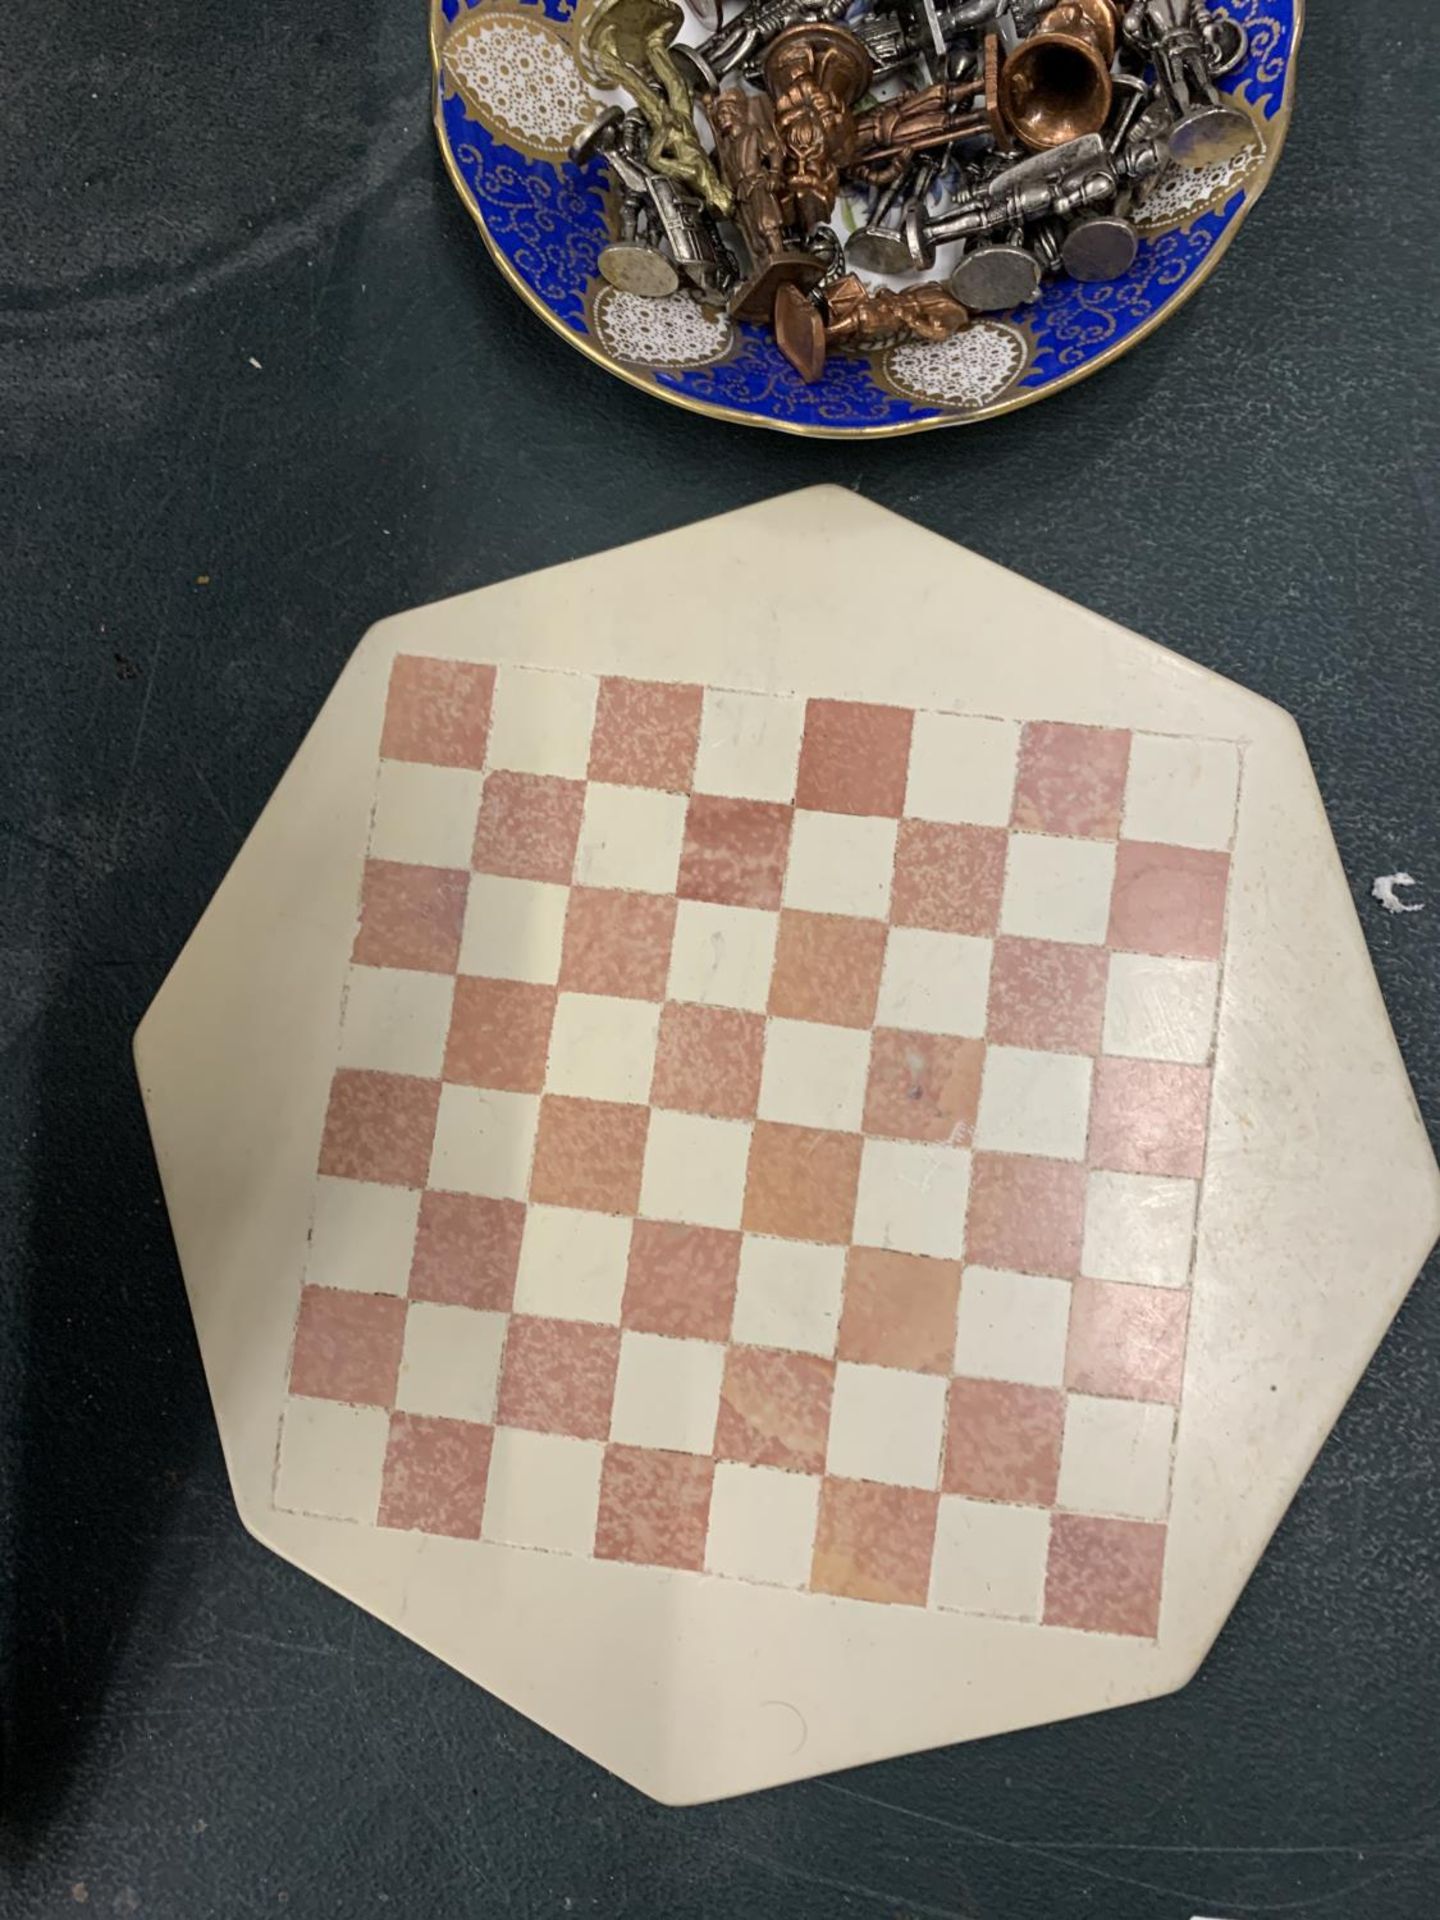 A PART SET OF CHESS PIECES (14 BLACK AND 14 WHITE), A BOARD WITH FIGURES PLUS A SMALL OCTAGONAL - Image 4 of 4